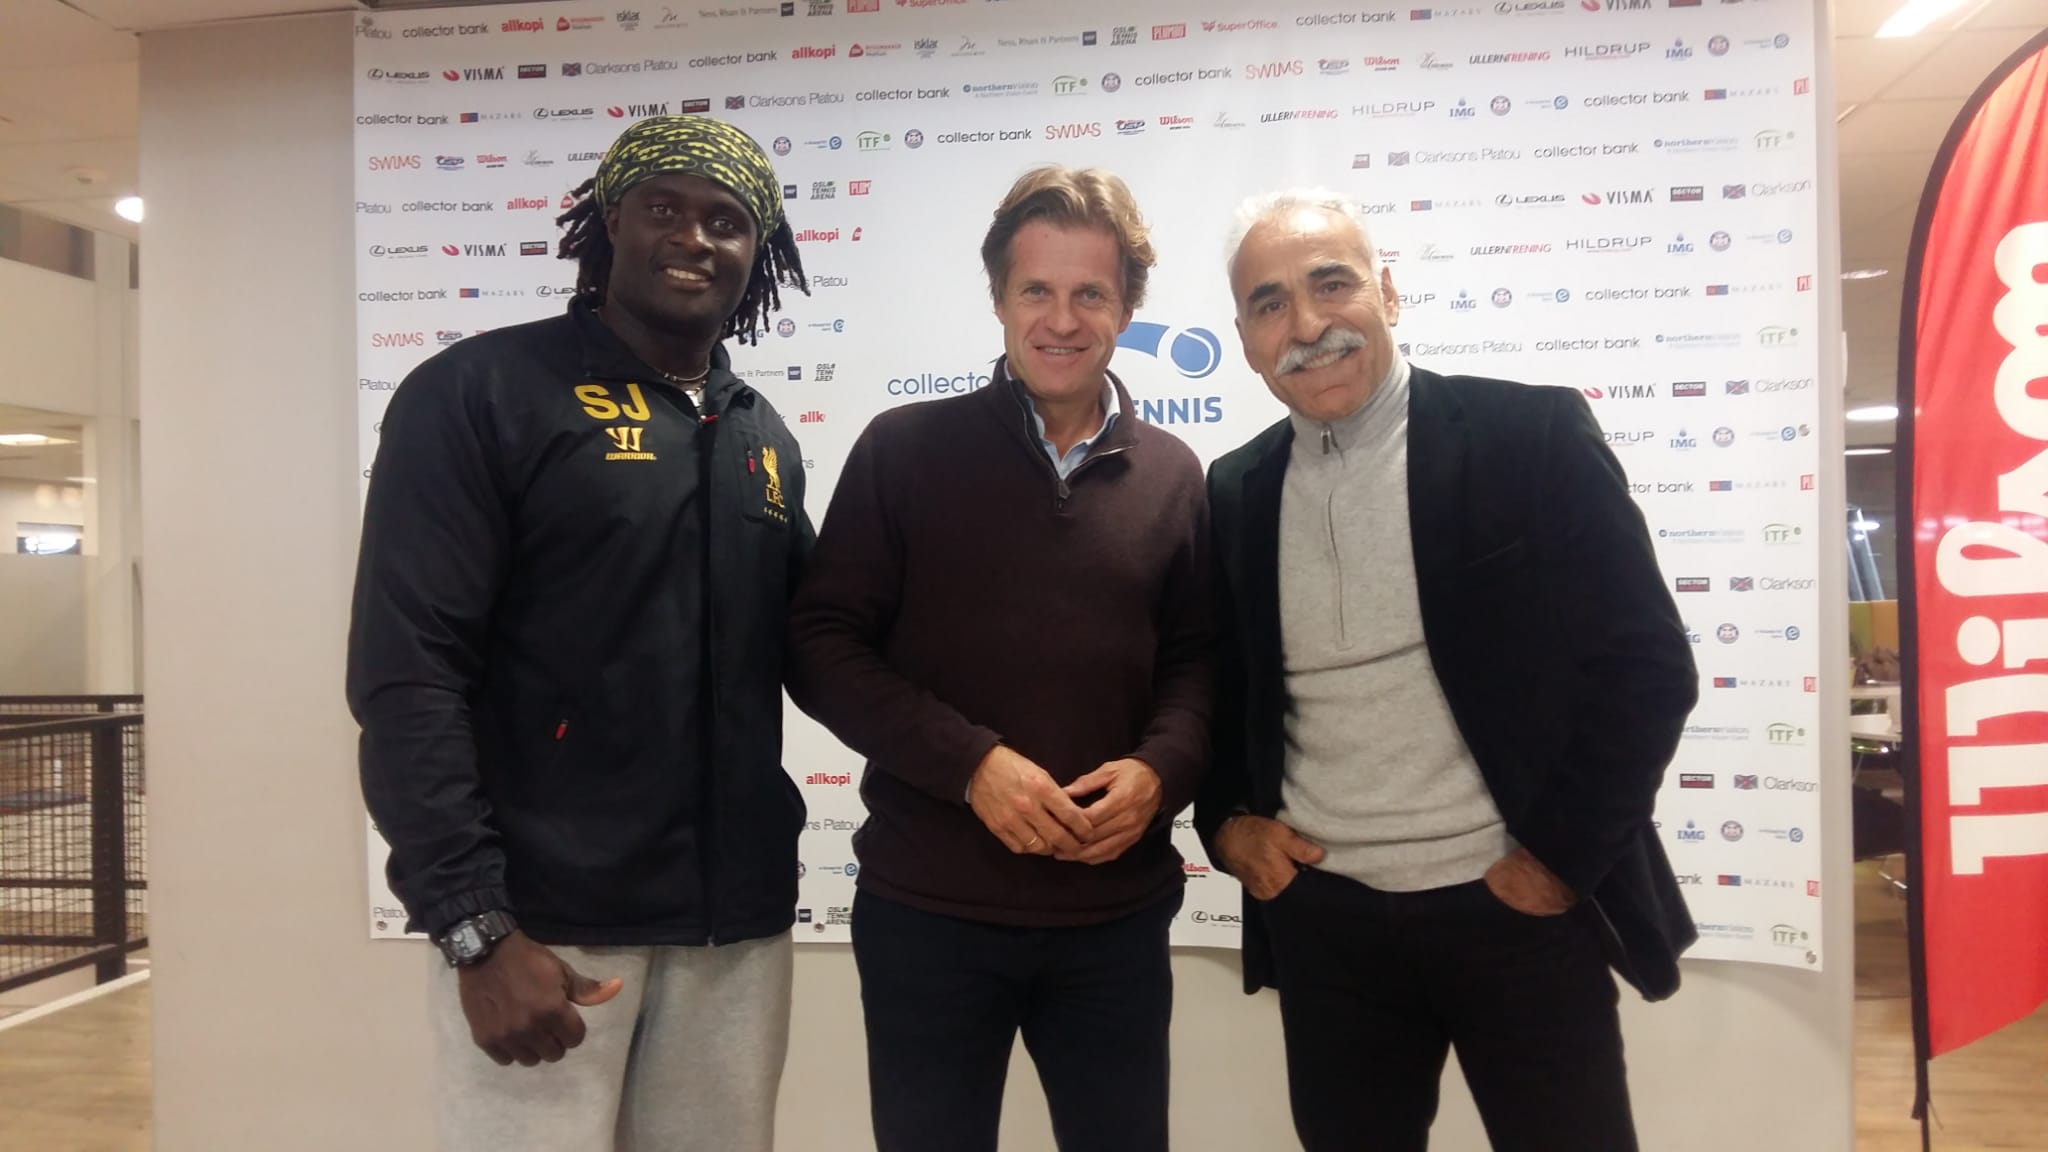 Sam Jalloh with Anders Borg and Mansour Bahrami in Norway